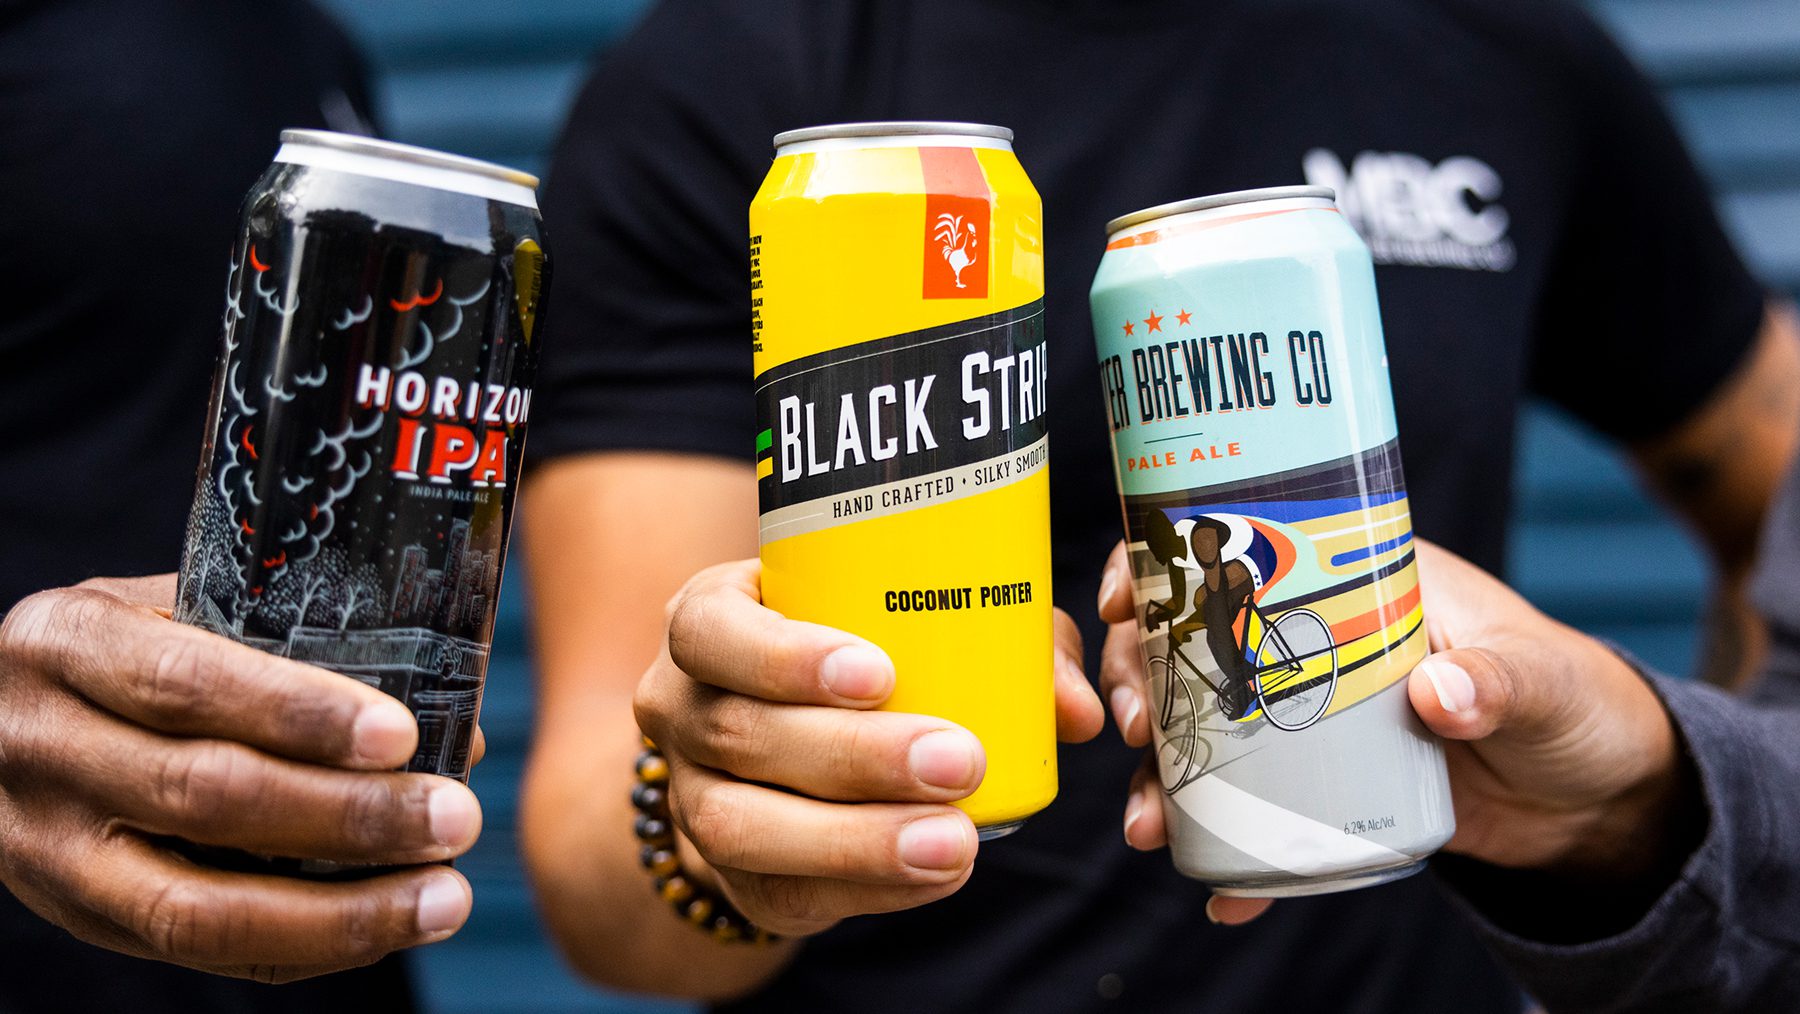 Hands holding cans of Horizon IPA, Black Stripe Coconut Porter, and Metier Brewing Co Pale Ale